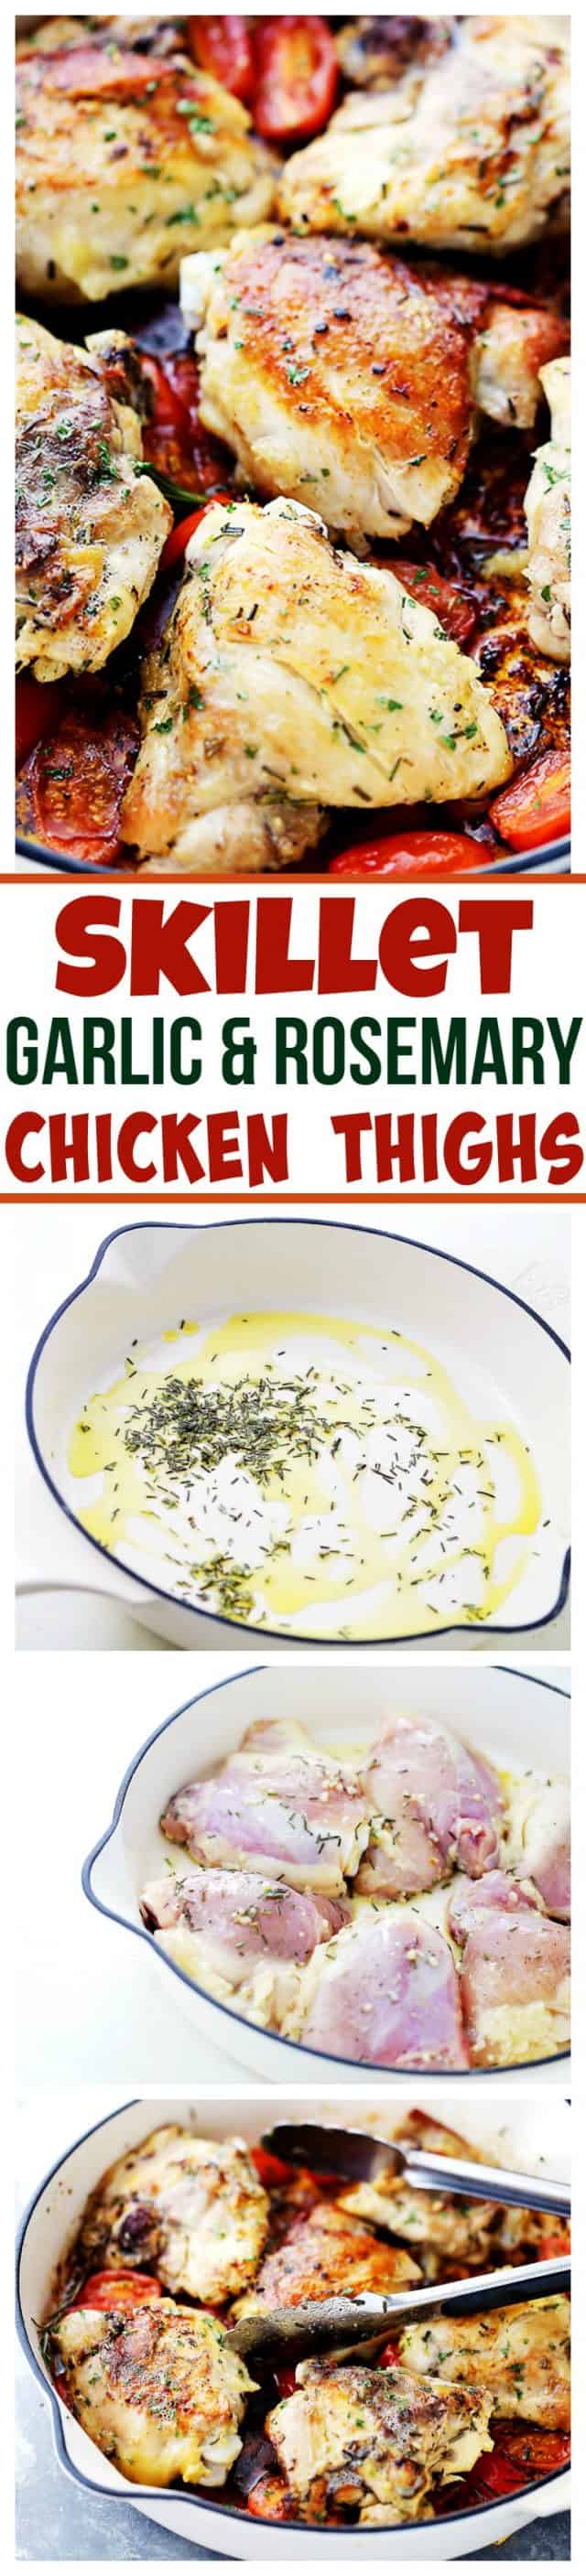 Pinterest image for rosemary chicken thighs.